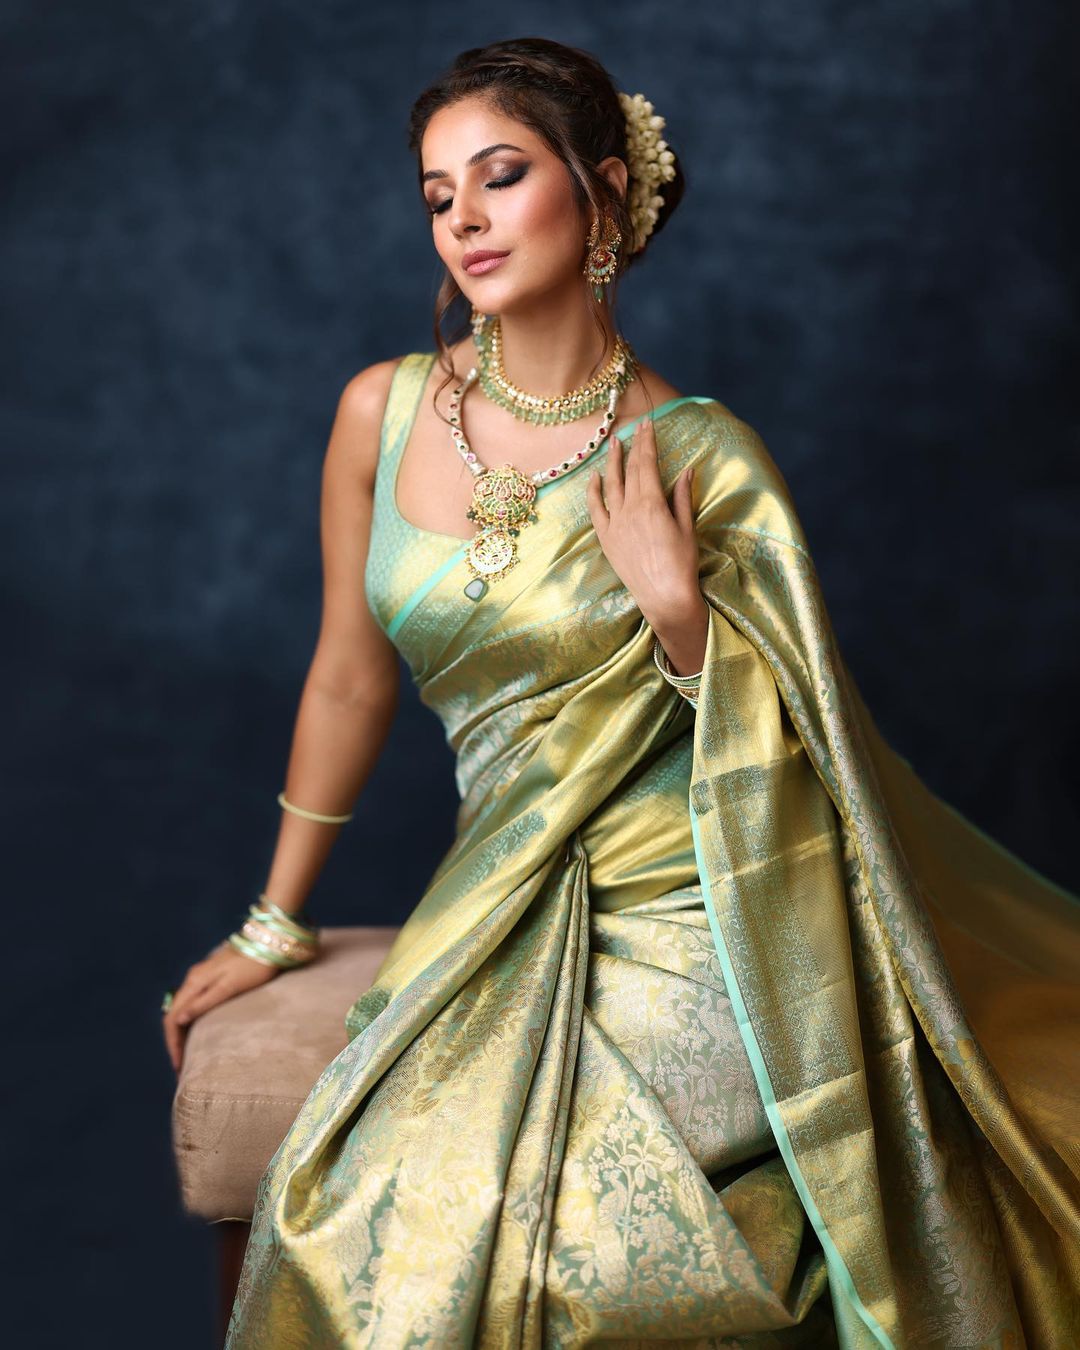 Shehnaaz Gill gives regal vibes in the purely traditional avatar.  